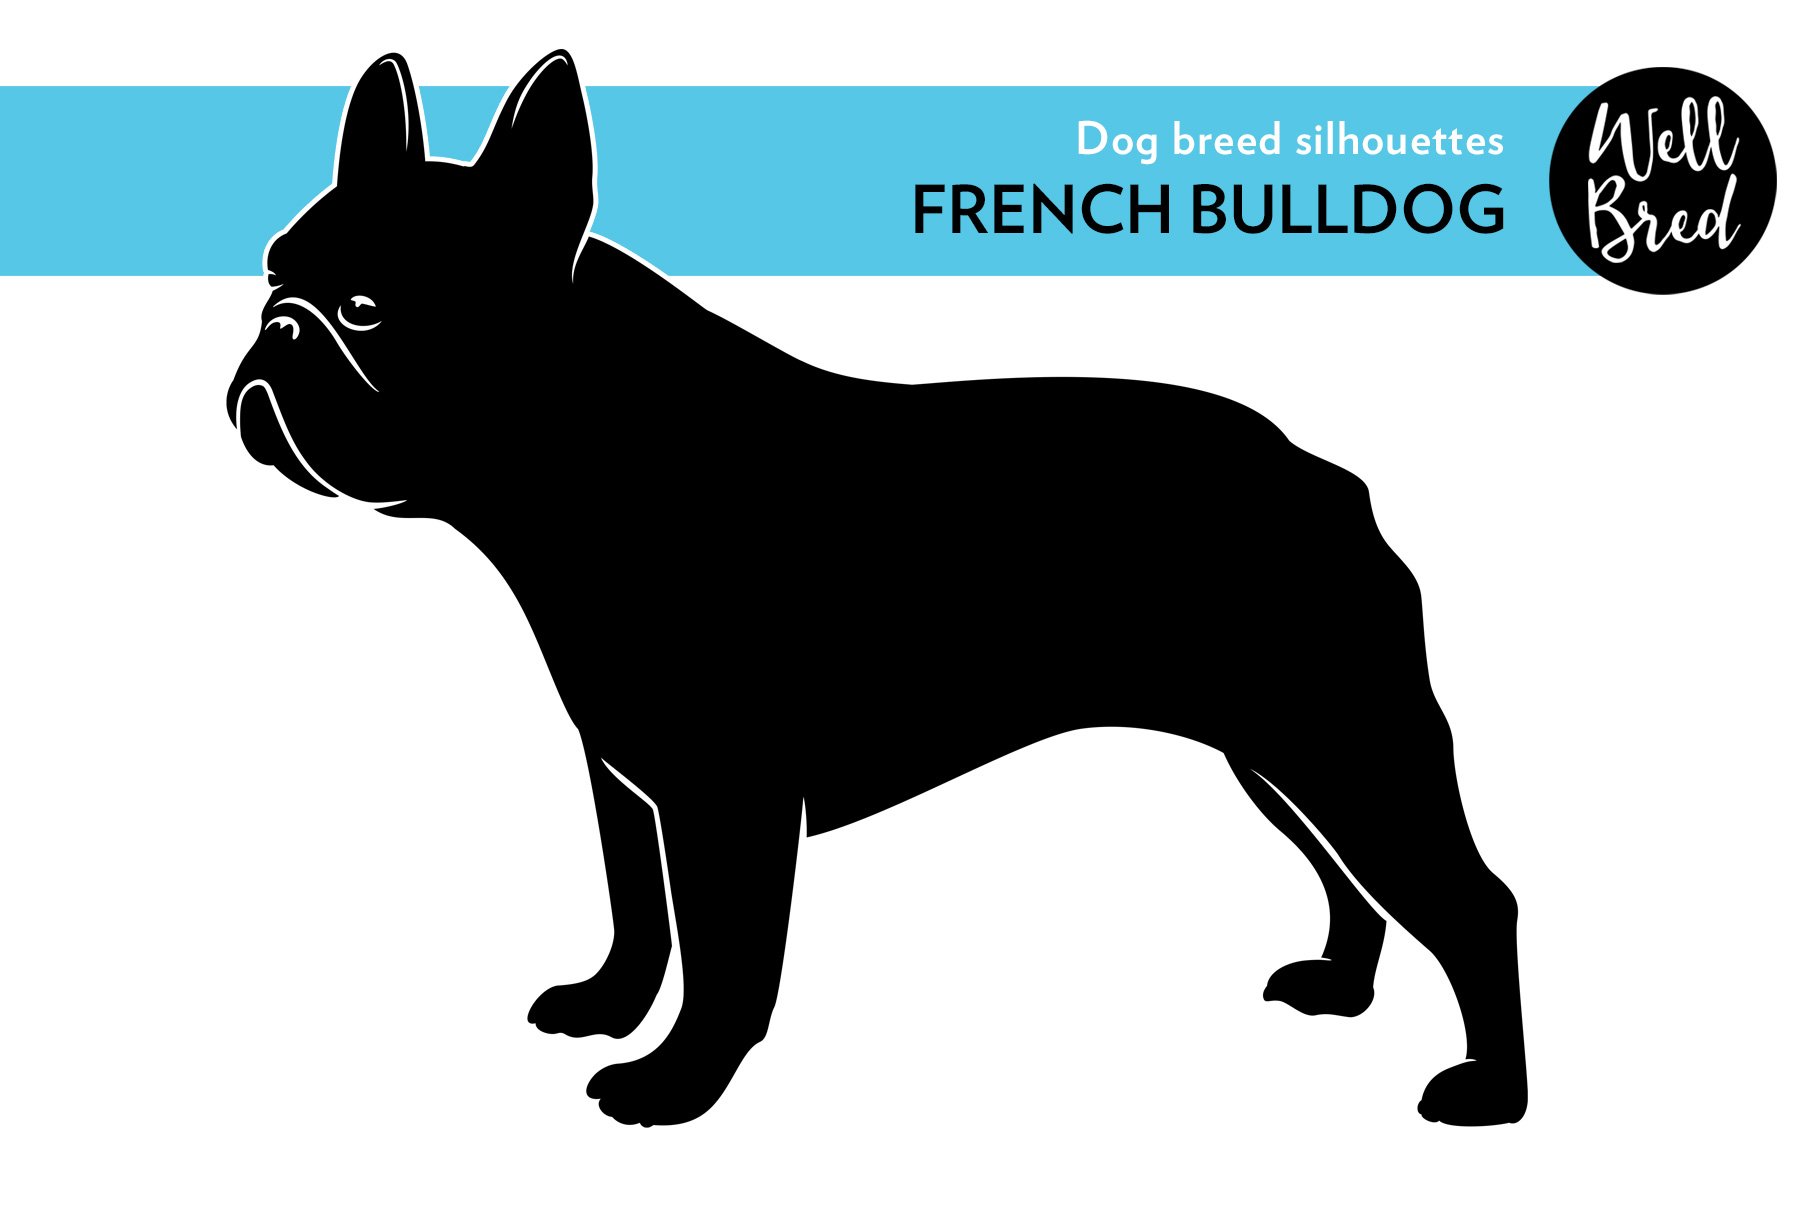 French Bulldog Vector Silhouette cover image.